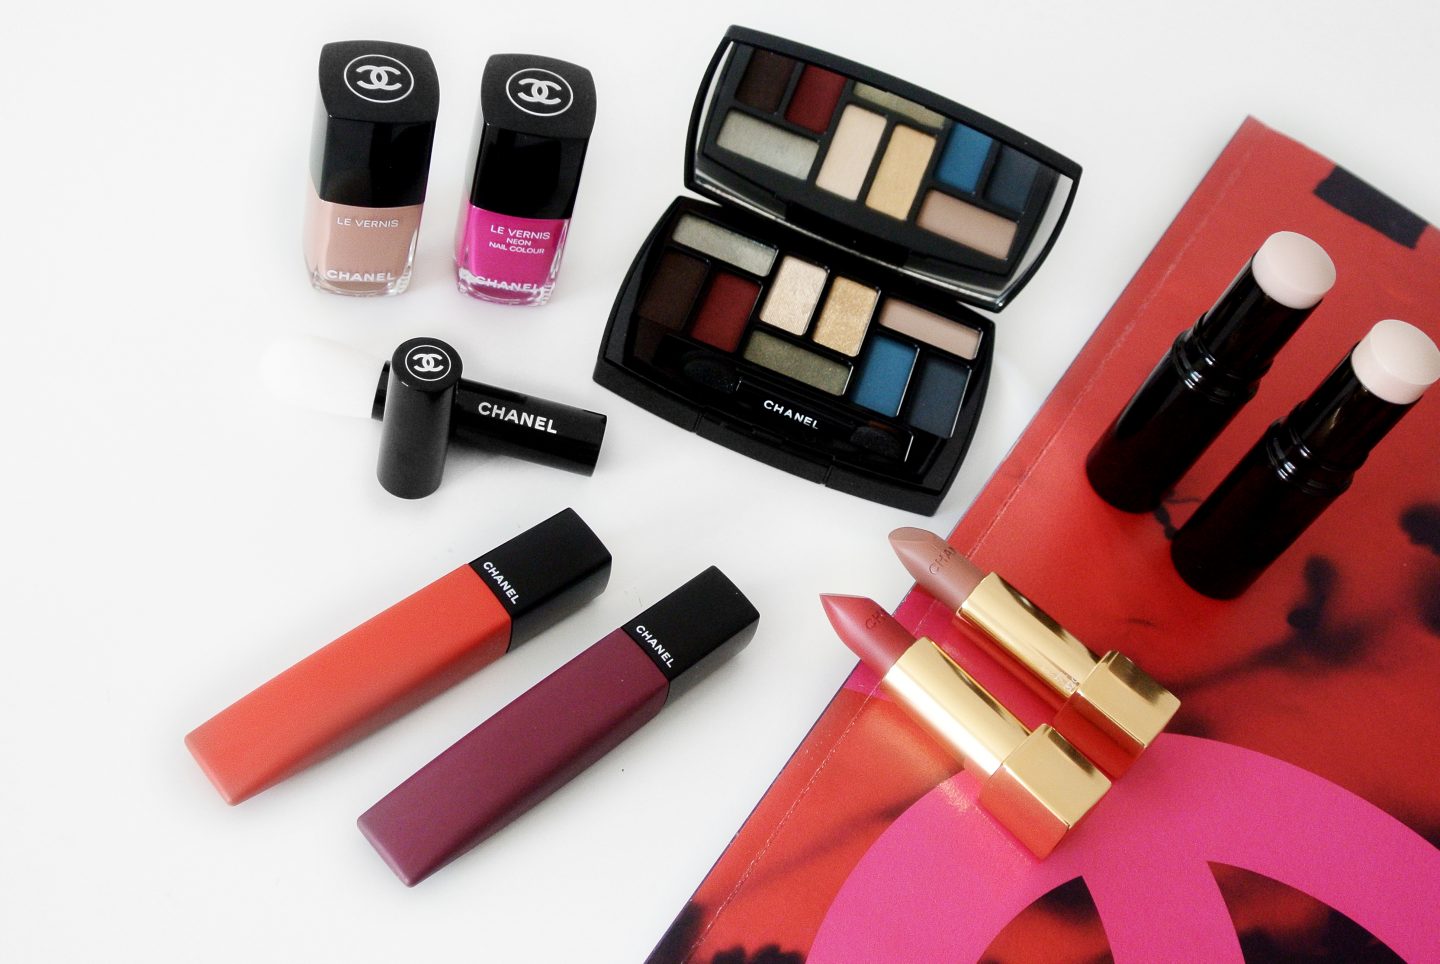 Review & Swatches: Chanel Spring Summer Makeup 2019 - My Women Stuff